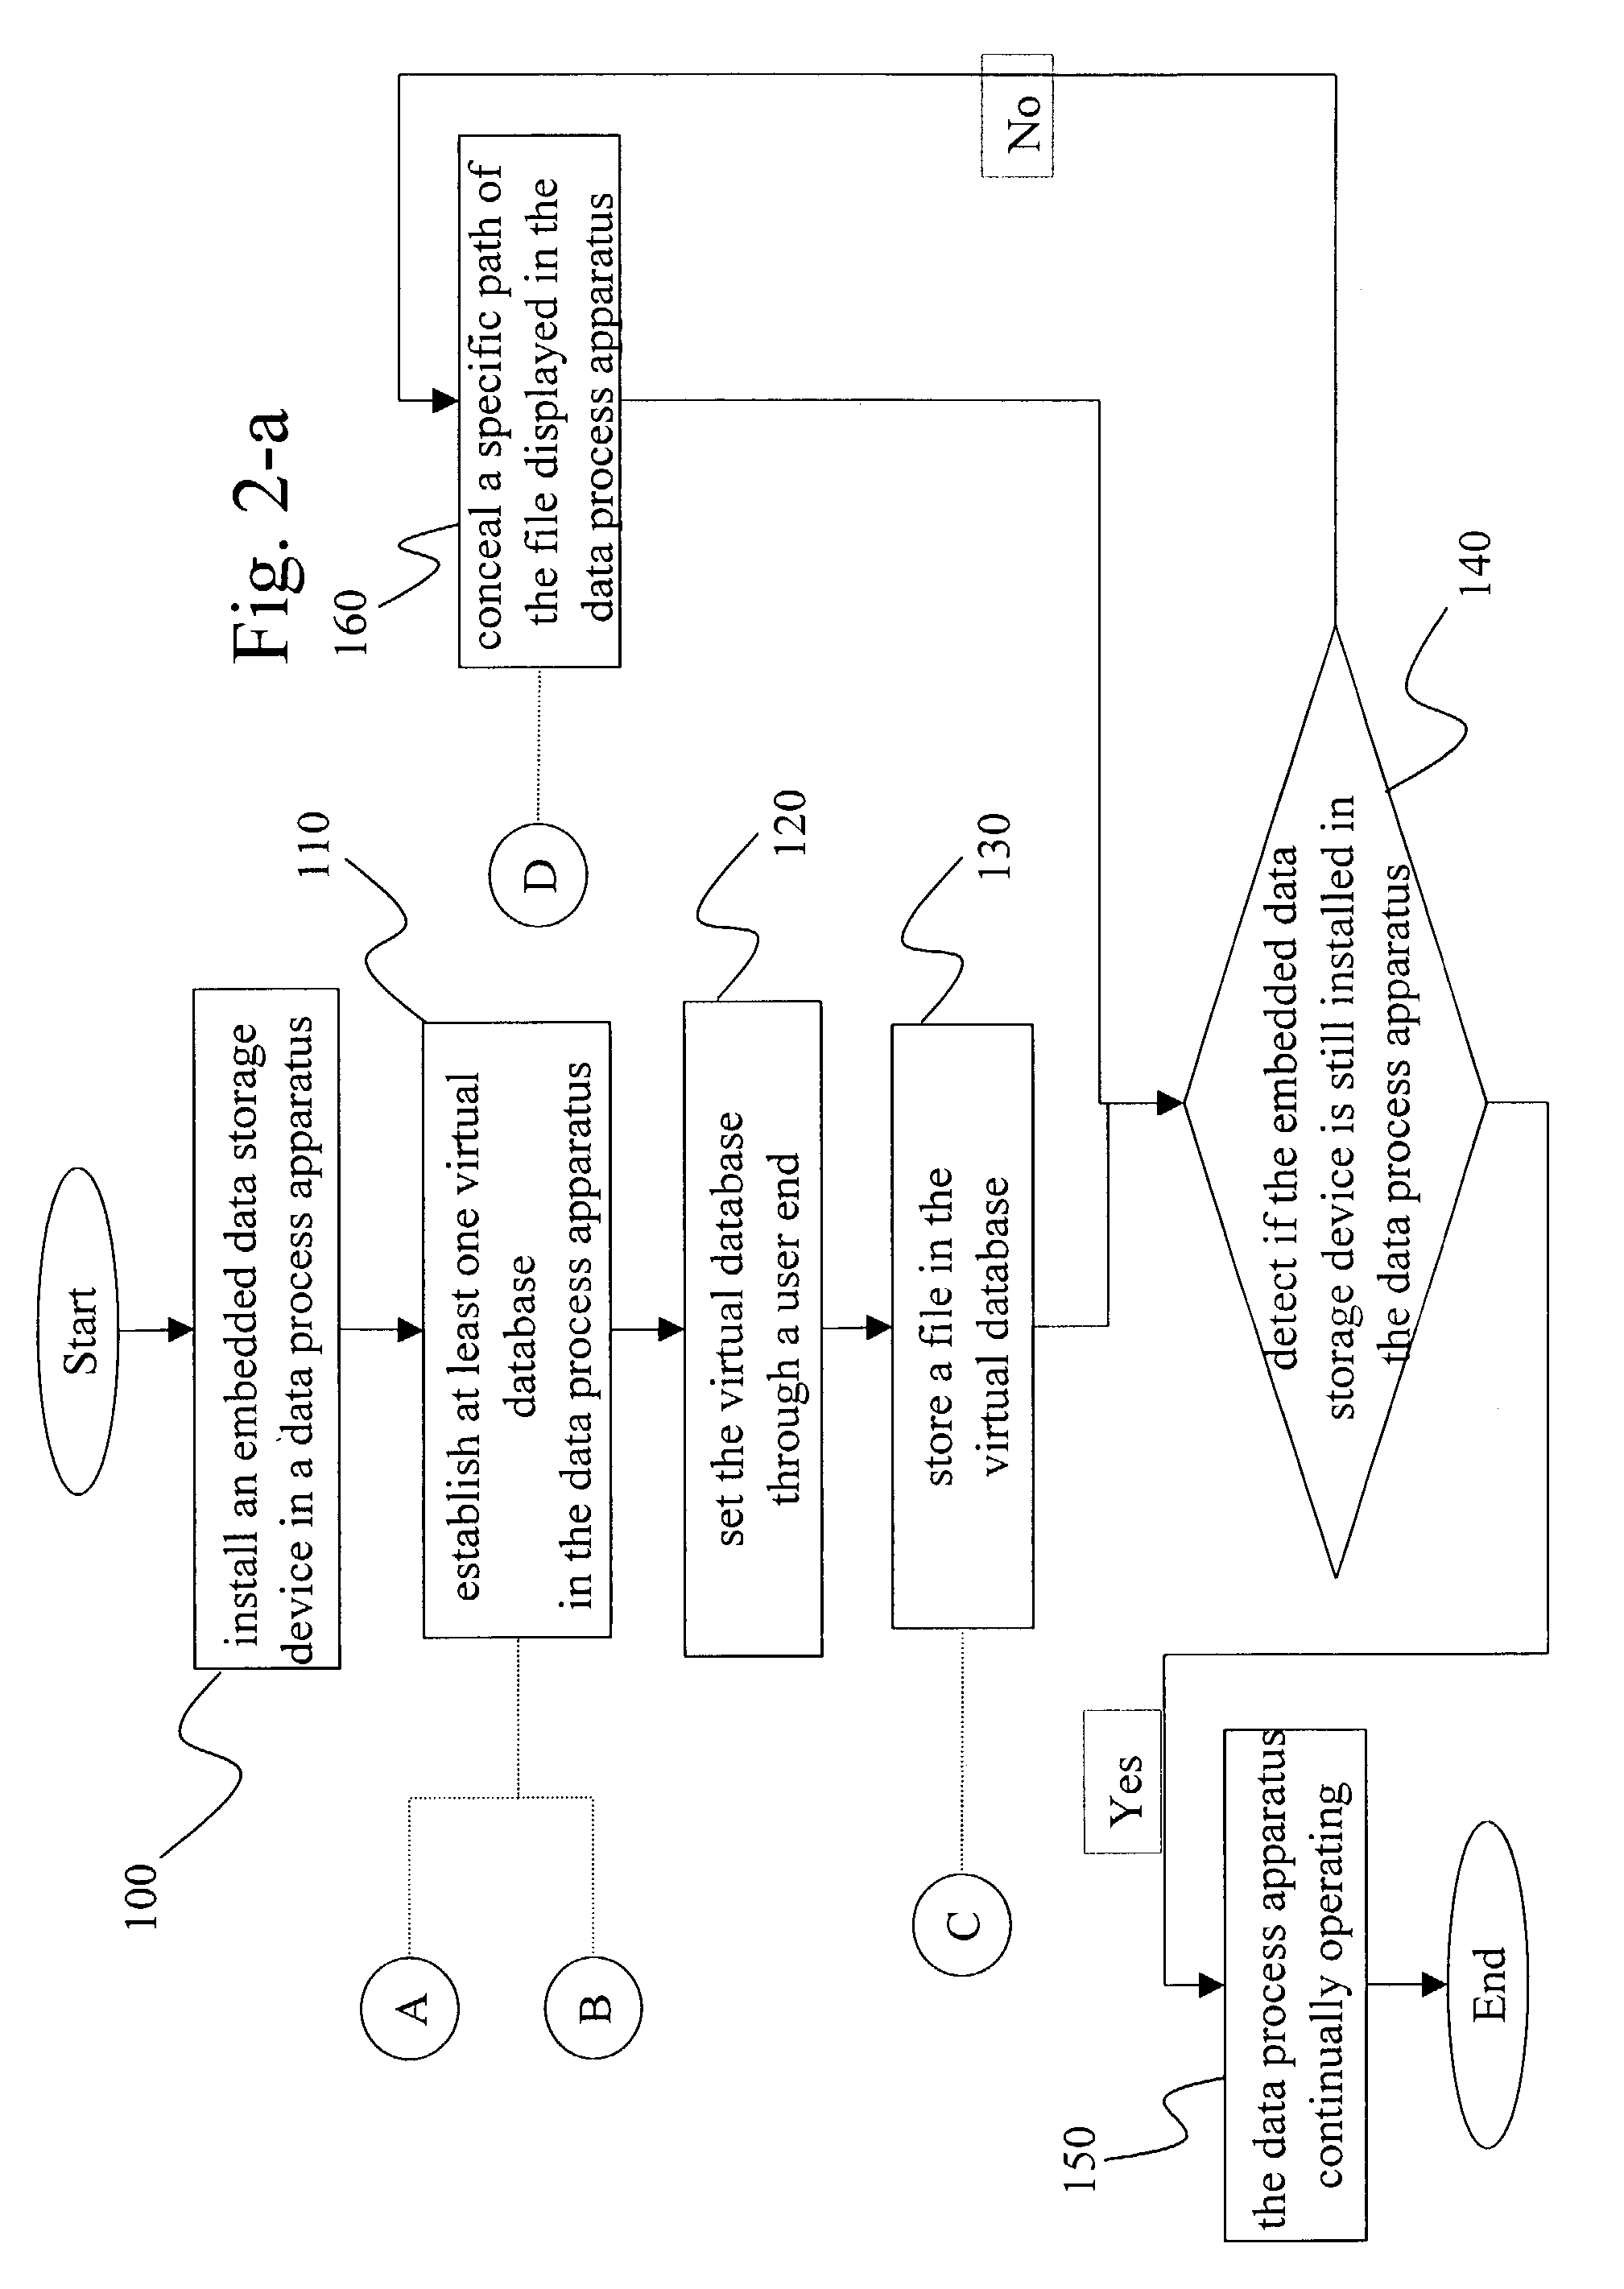 Method with the functions of virtual space and data encryption and invisibility